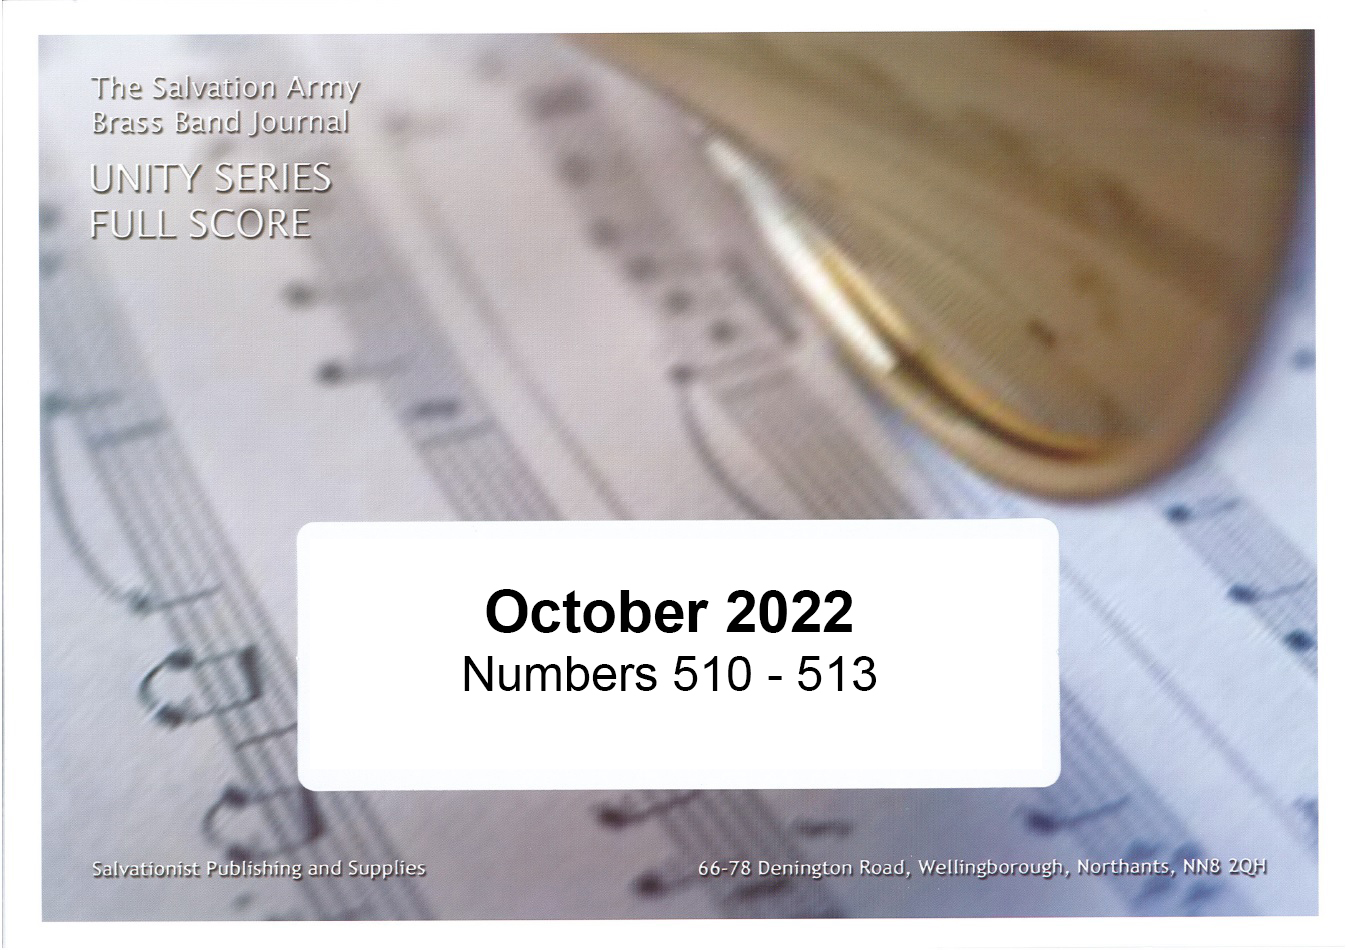 Unity Series Band Journal October 2022 Numbers 510 - 513